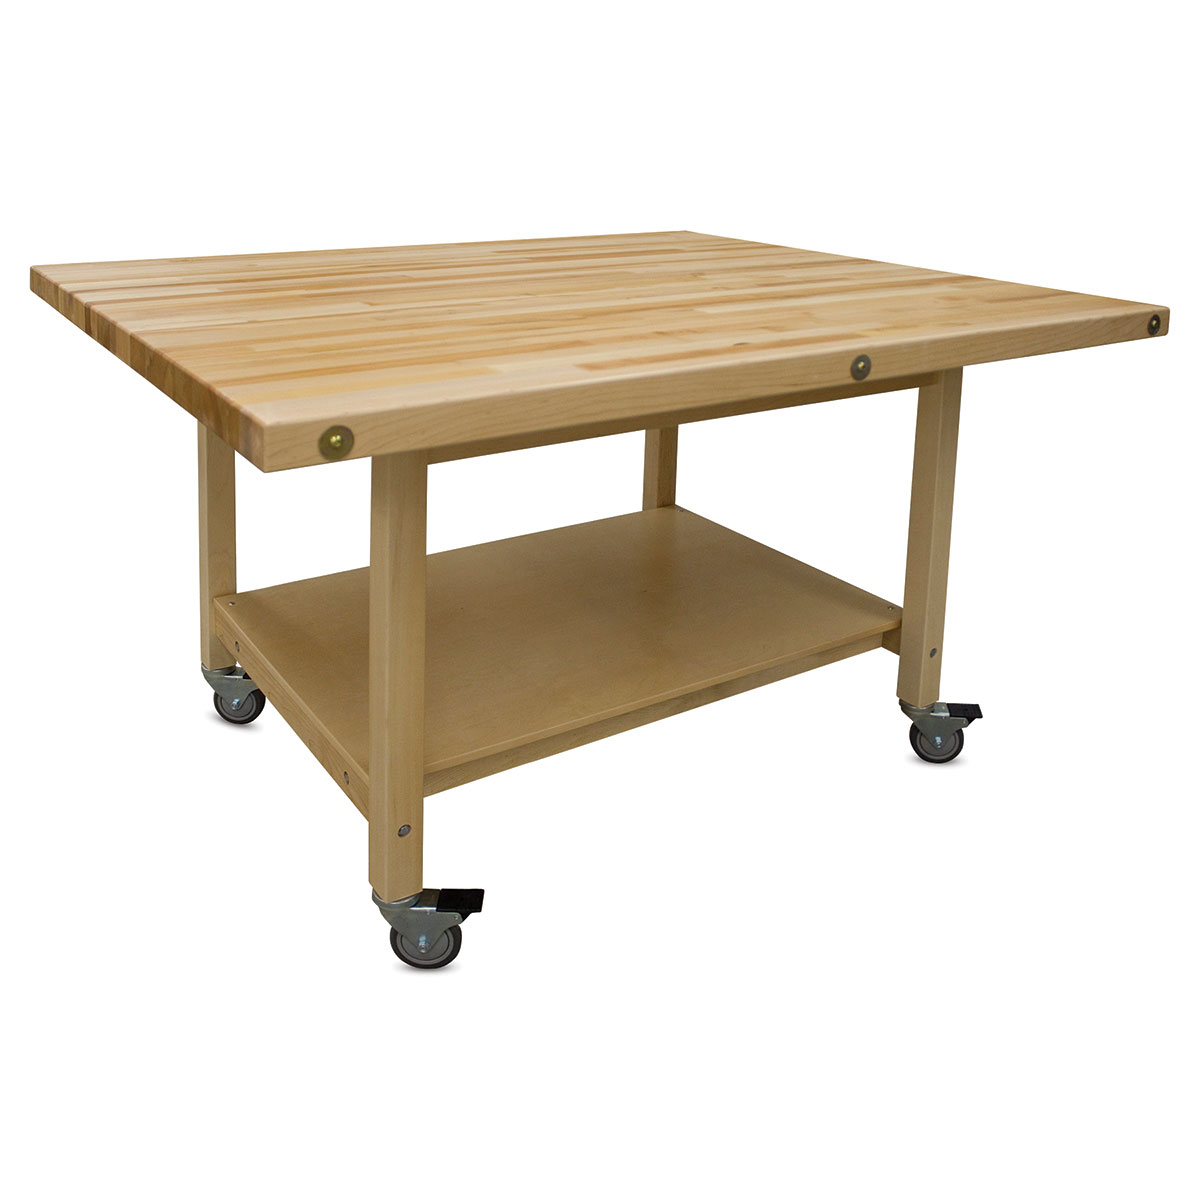 Hann Student Project Table with Casters - Maple Top, 54'W x 64'L x 36'H